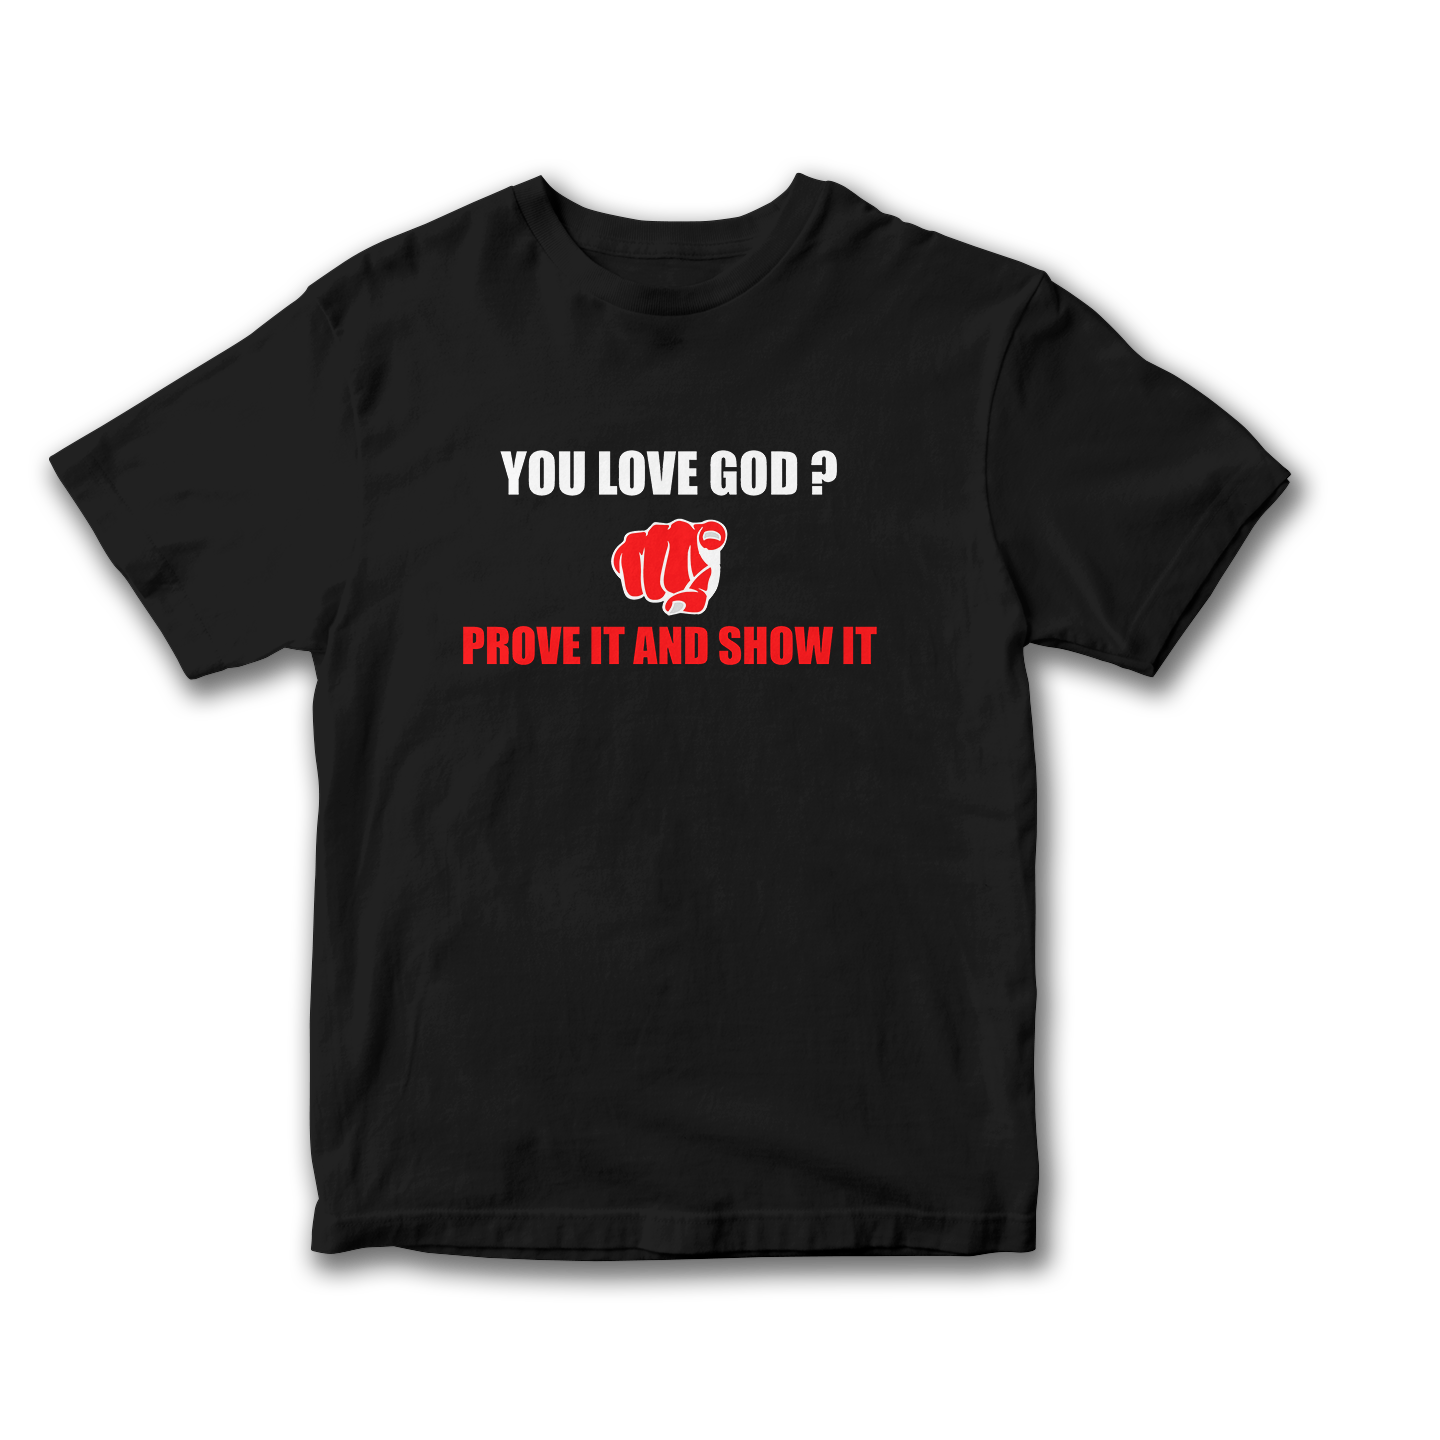 You Love God, Prove it and Show it Shirt